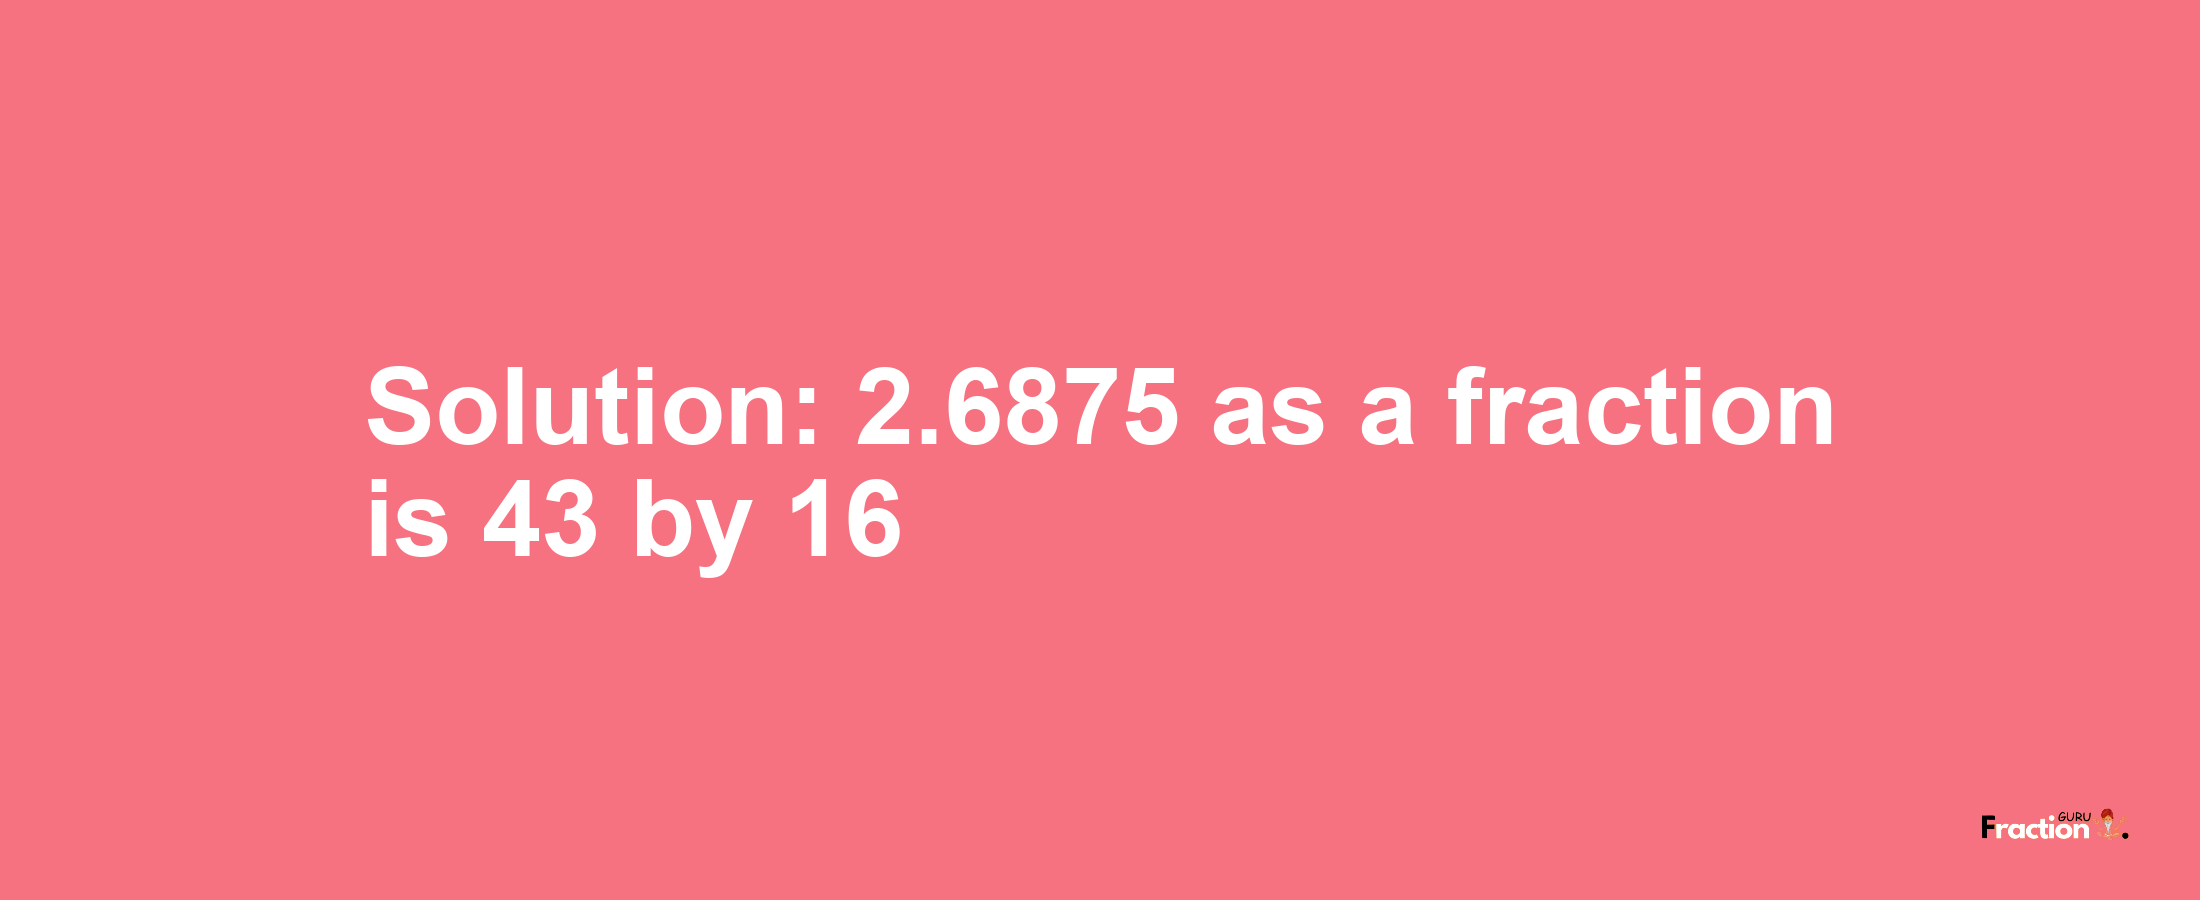 Solution:2.6875 as a fraction is 43/16